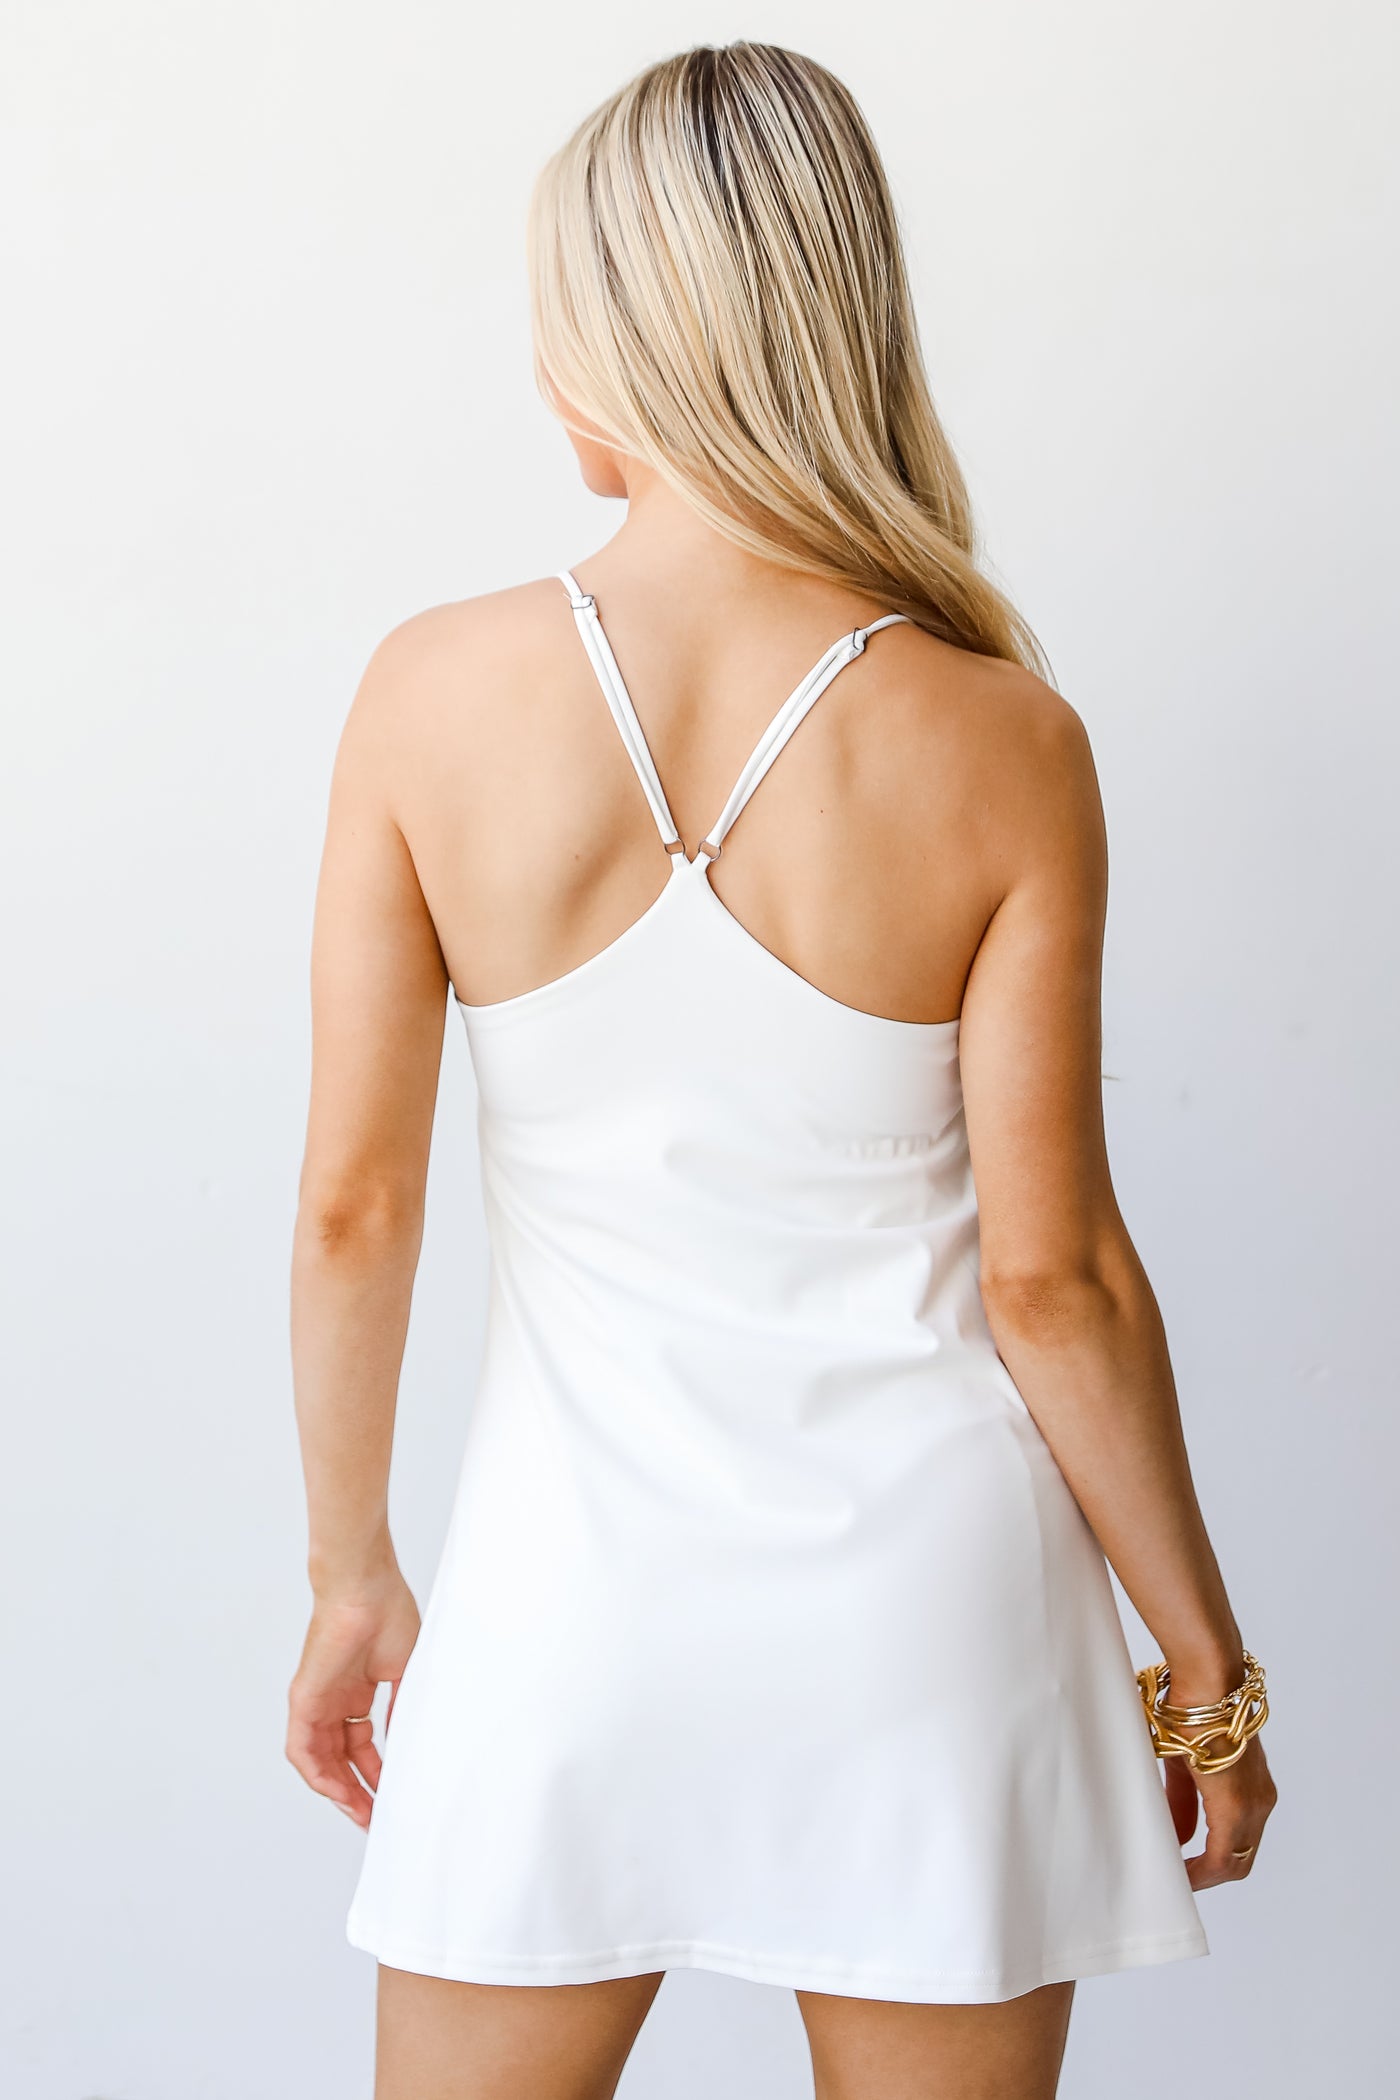 white Athletic Dress back view